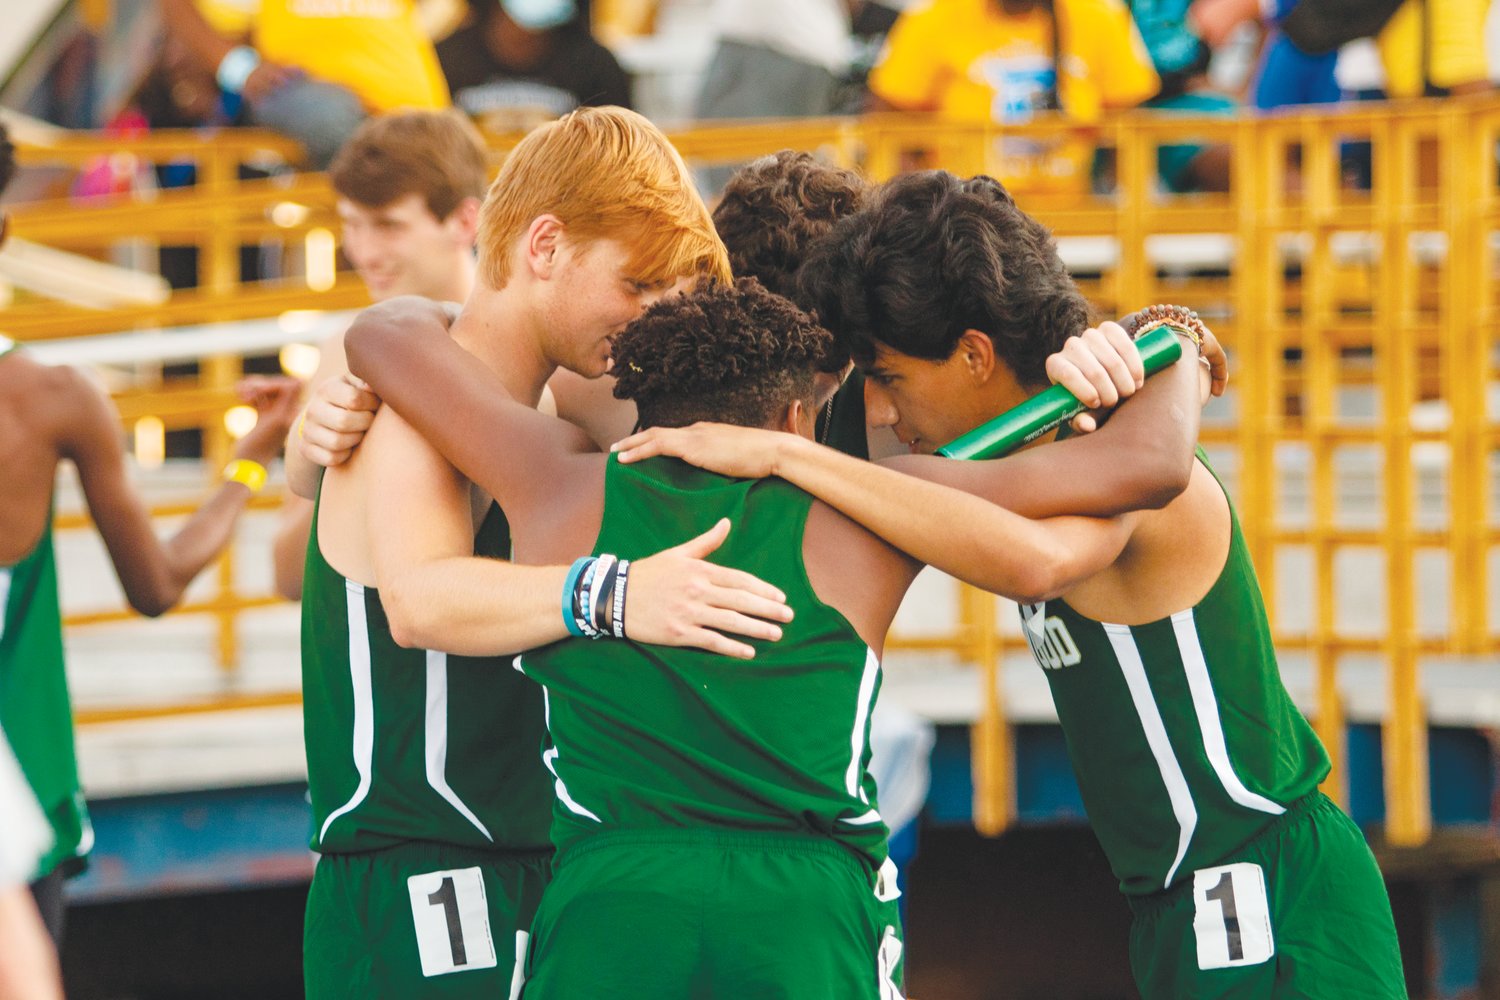 Northwood's men's 4x400-meter relay team, consisting of sophomore Noah Nielson, senior Jack Spotz, junior Christian Glick and senior Marco Sanchez, huddle up prior to running at the NCHSAA 3A Track & Field State Championships last Friday. The team took eighth place with a time of 3:29.50.